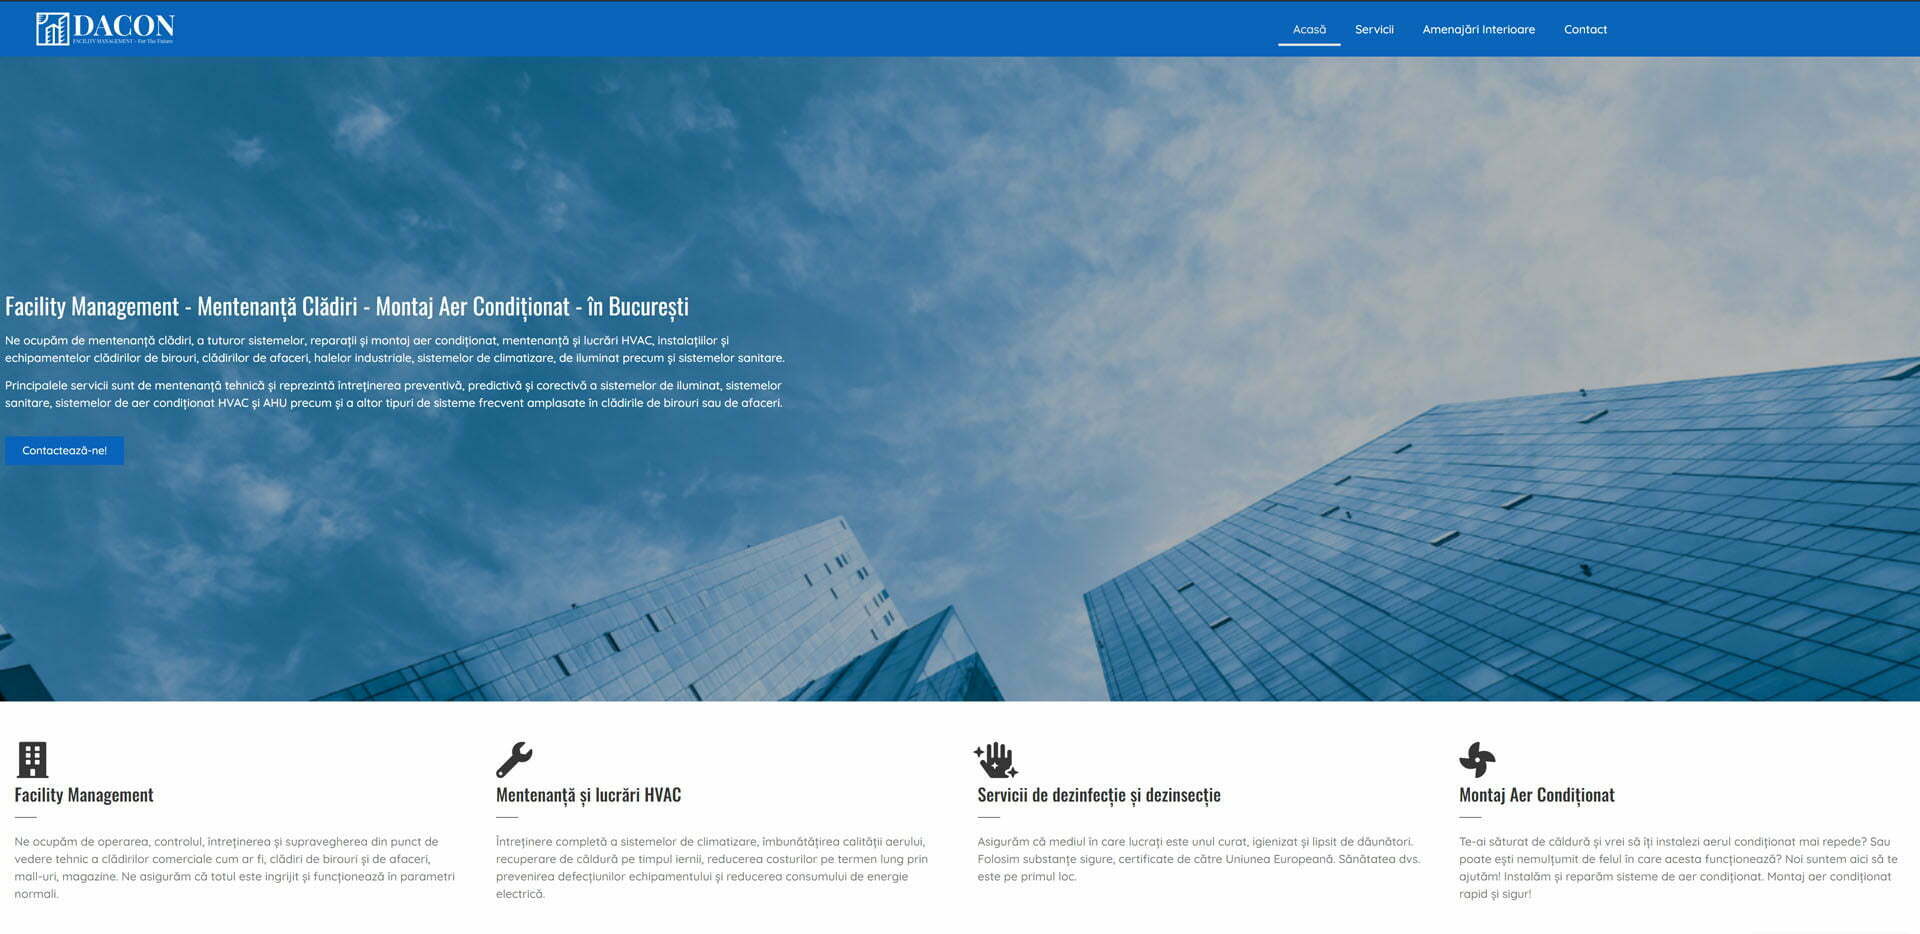 dacon-facility-management-homepage